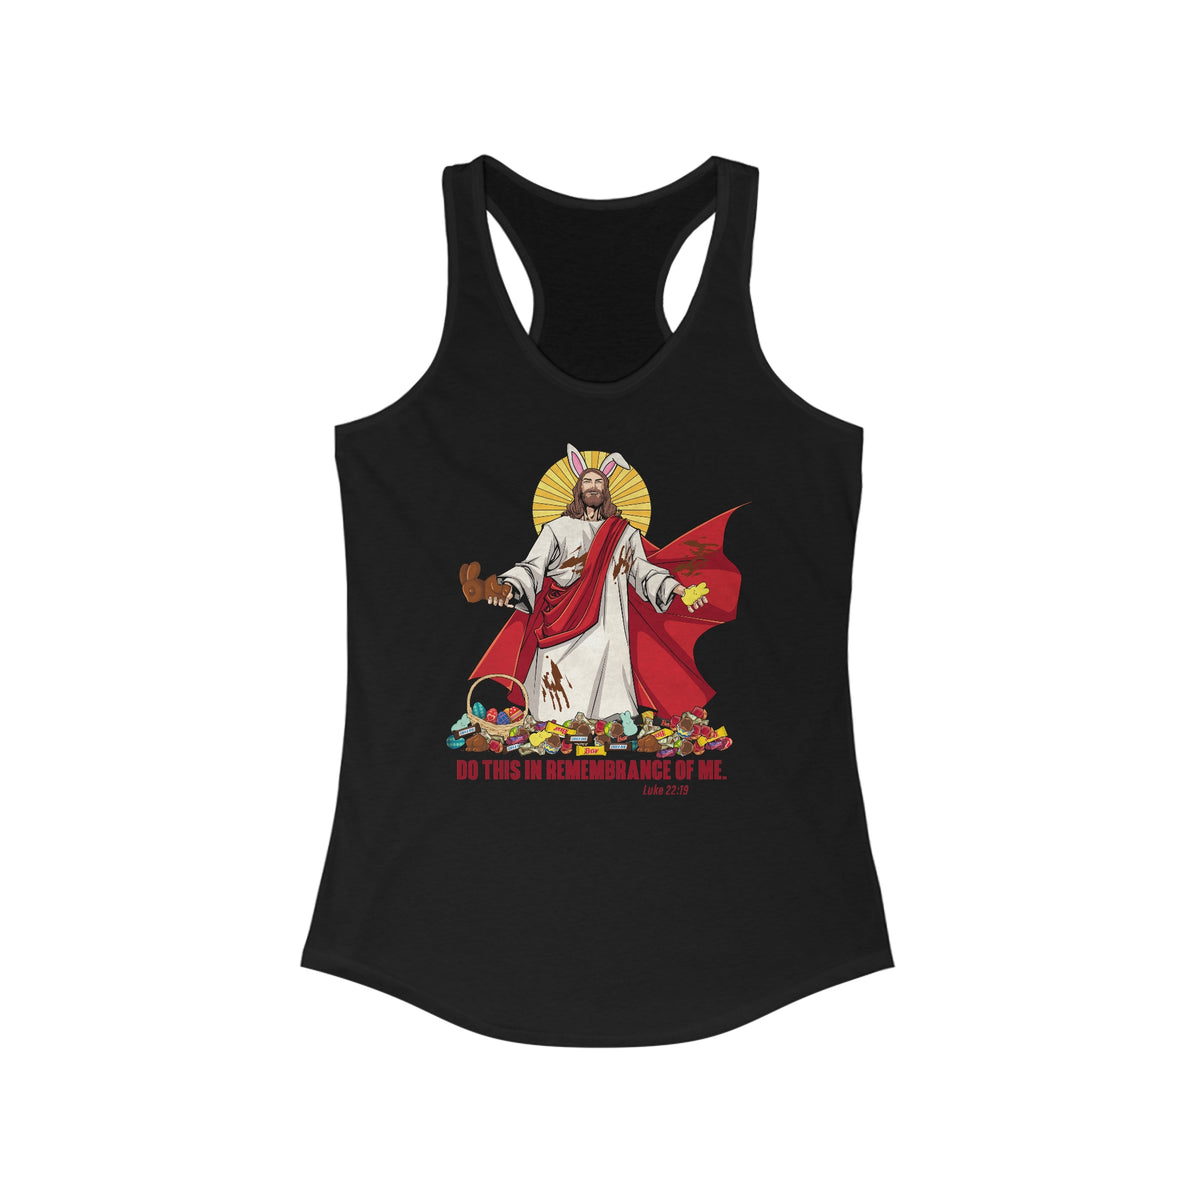 Do This In Remembrance Of Me. - Women’s Racerback Tank